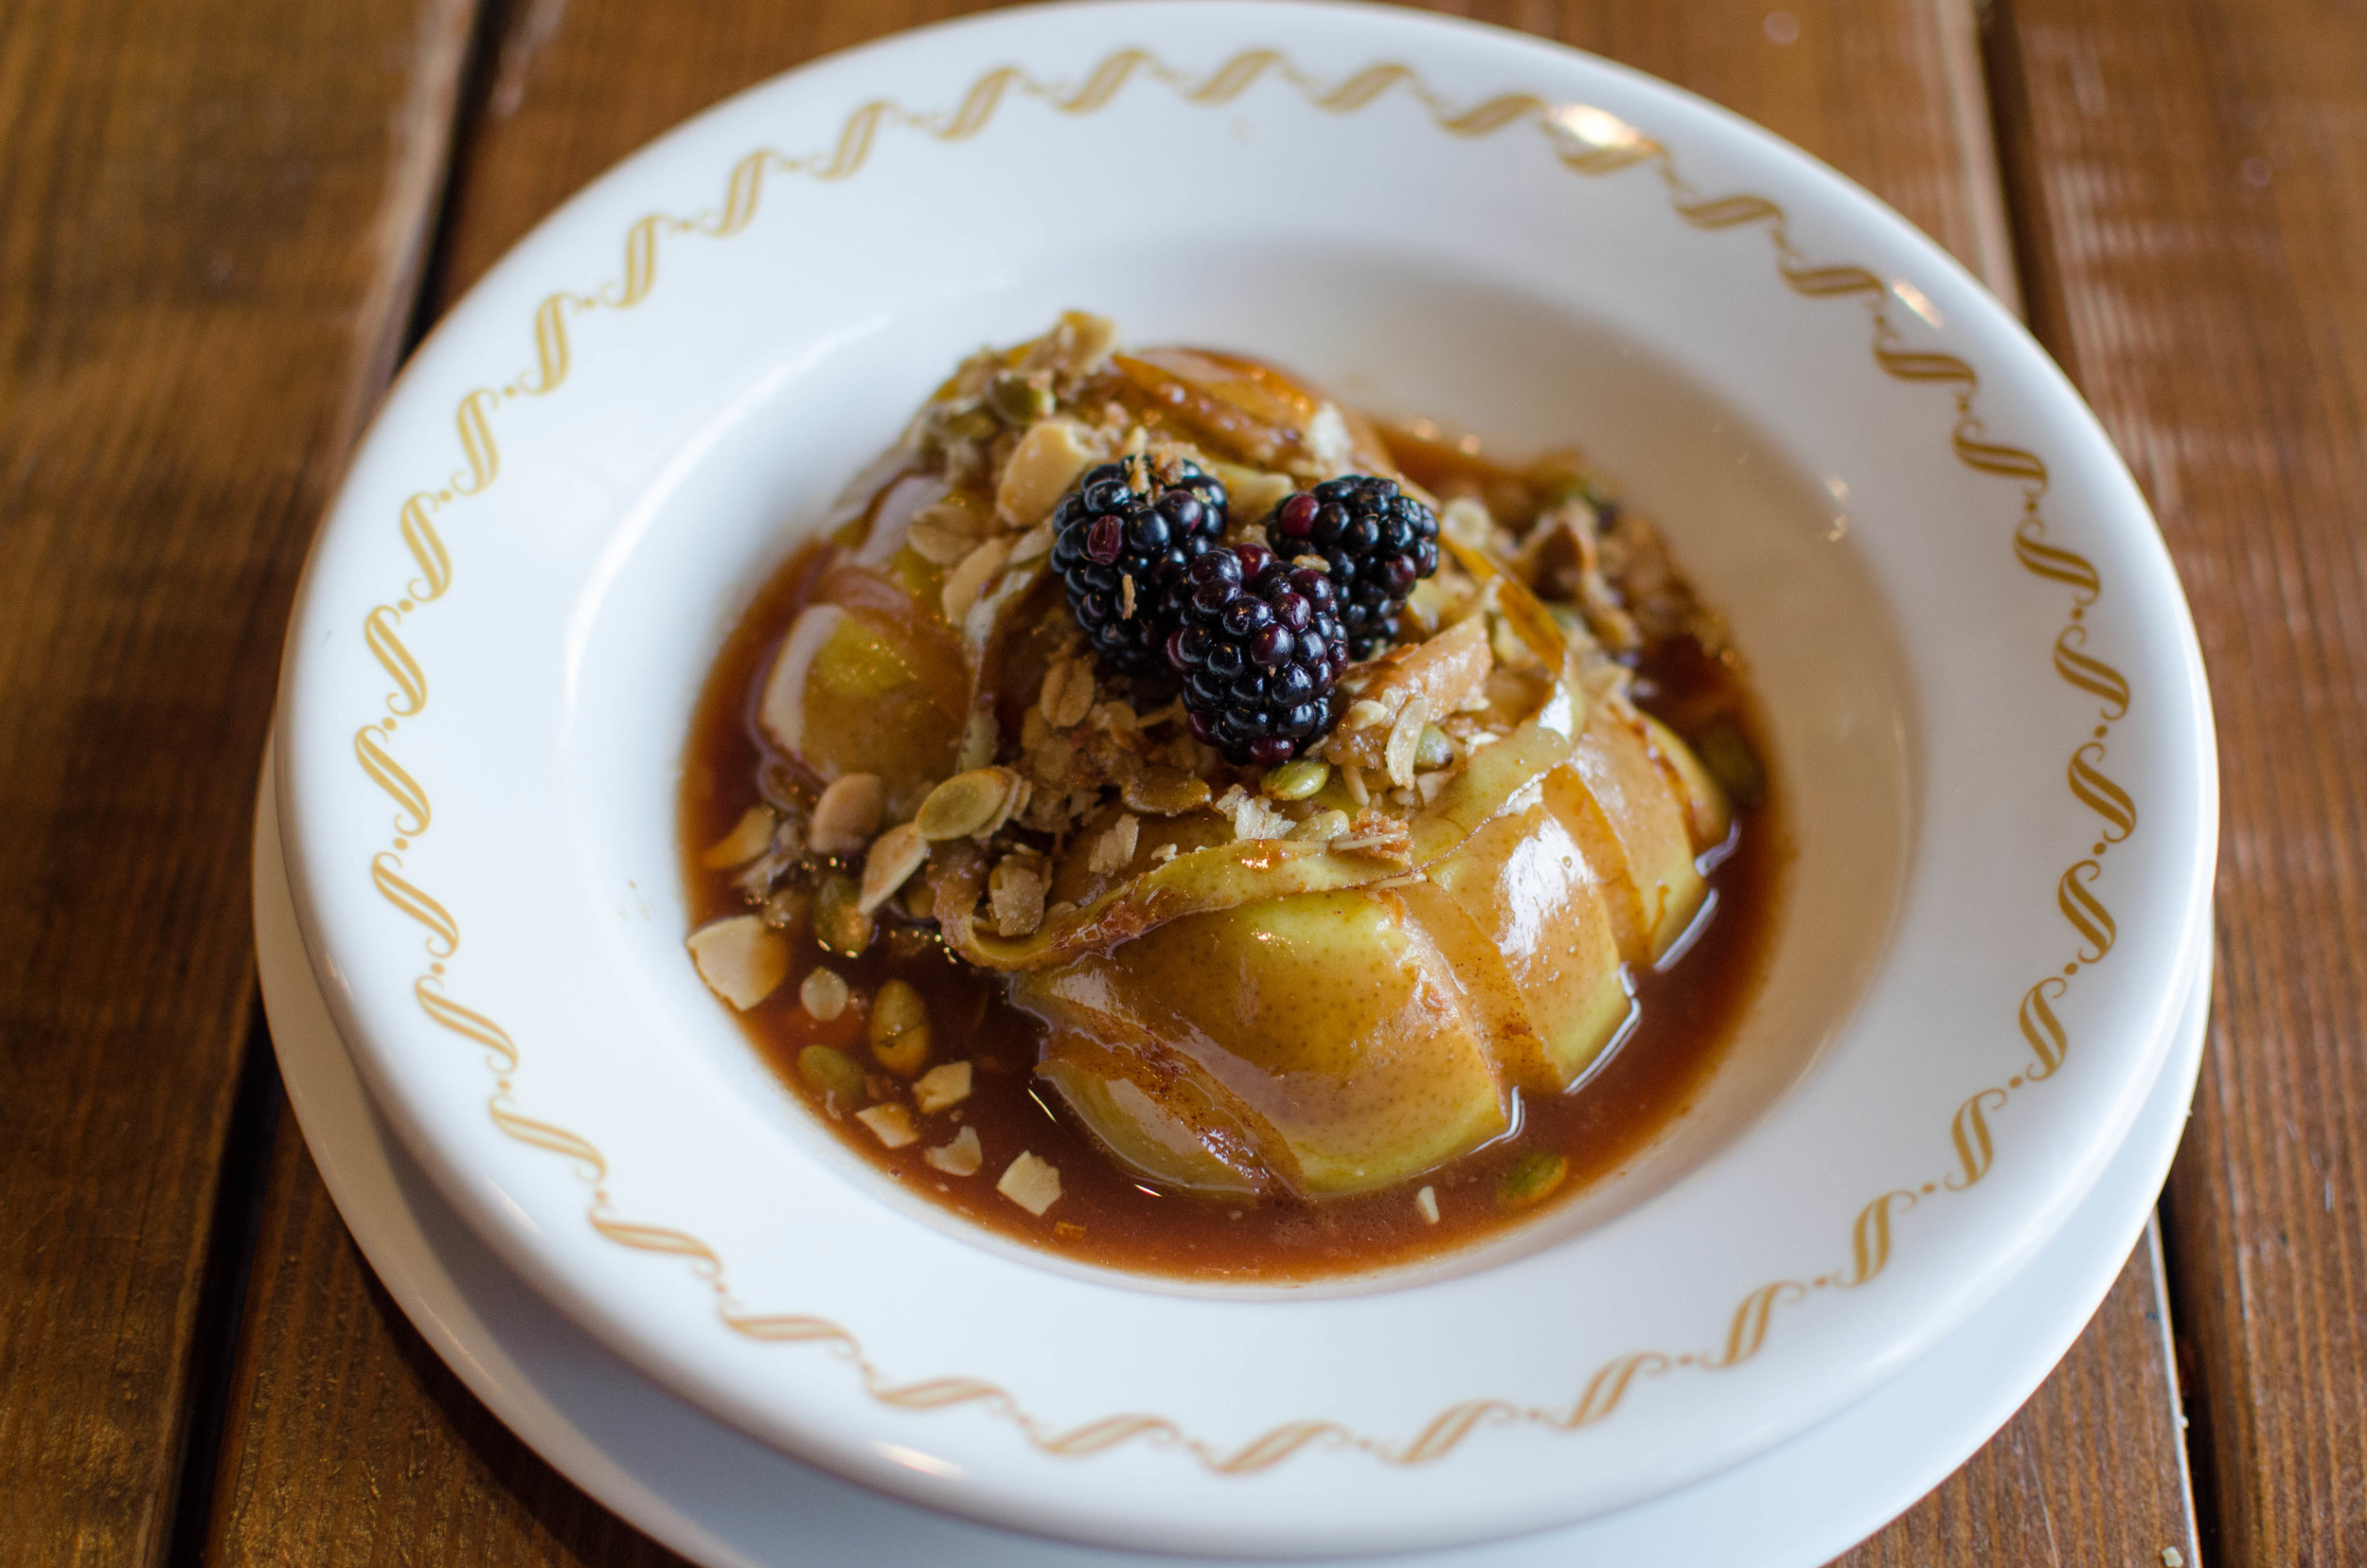 Baked Pears with Granola & Fruit